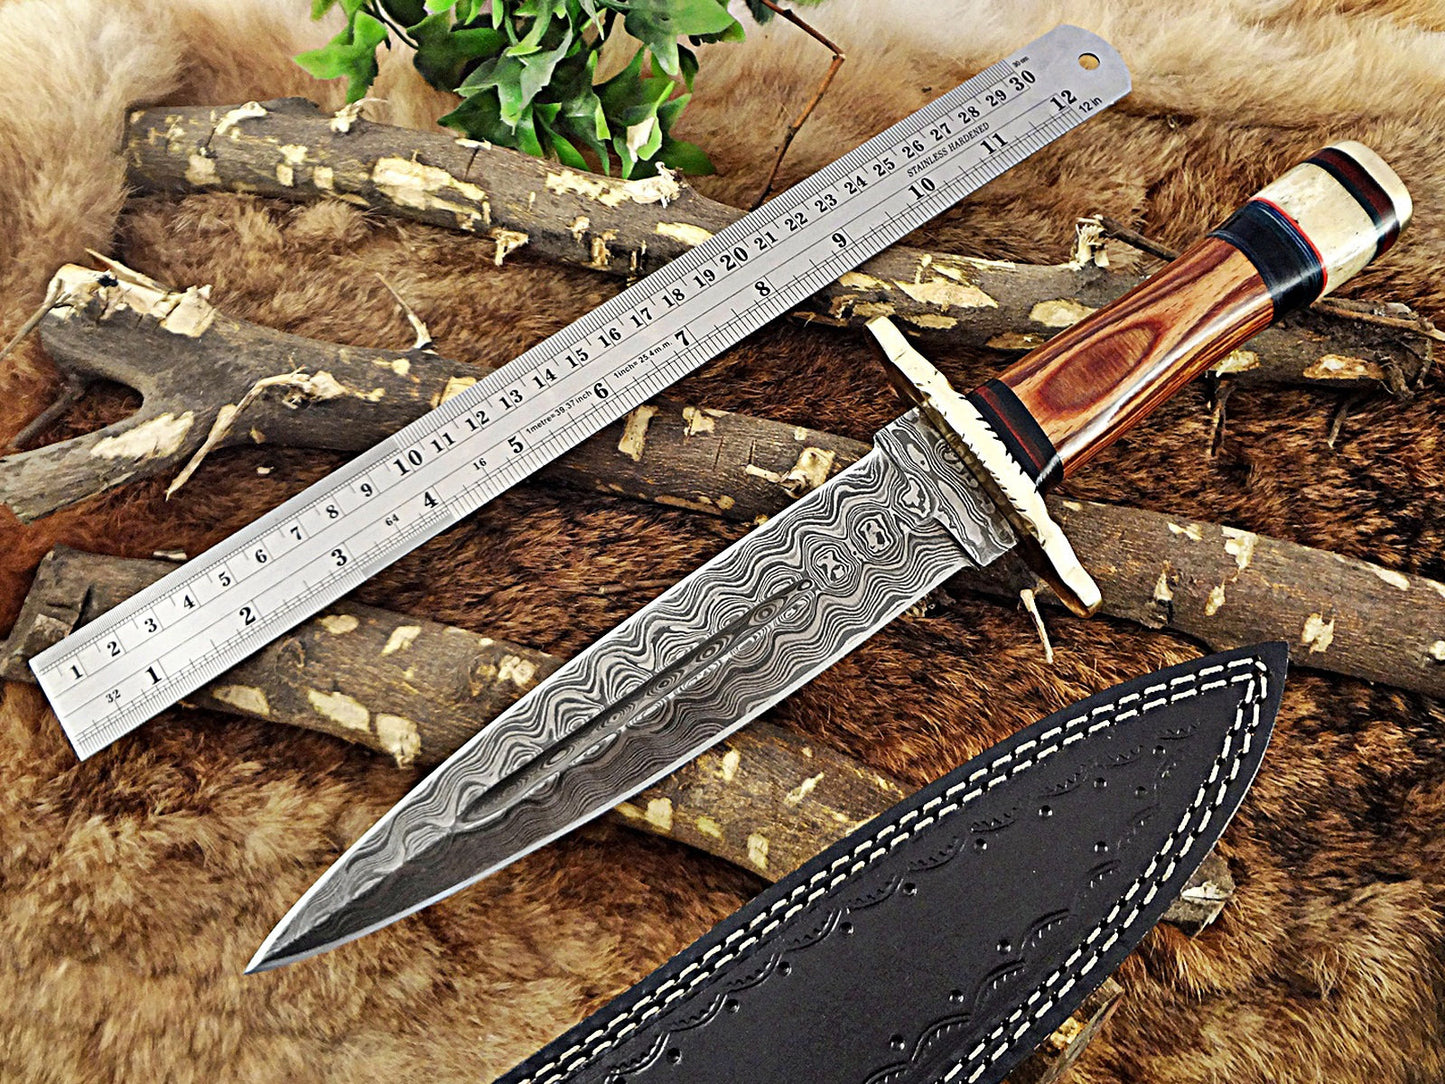 14" Long hand forged Damascus steel Dagger Knife, Dollar wood, bone and bull horn scale with brass cap and finger guard, Cow Leather sheath